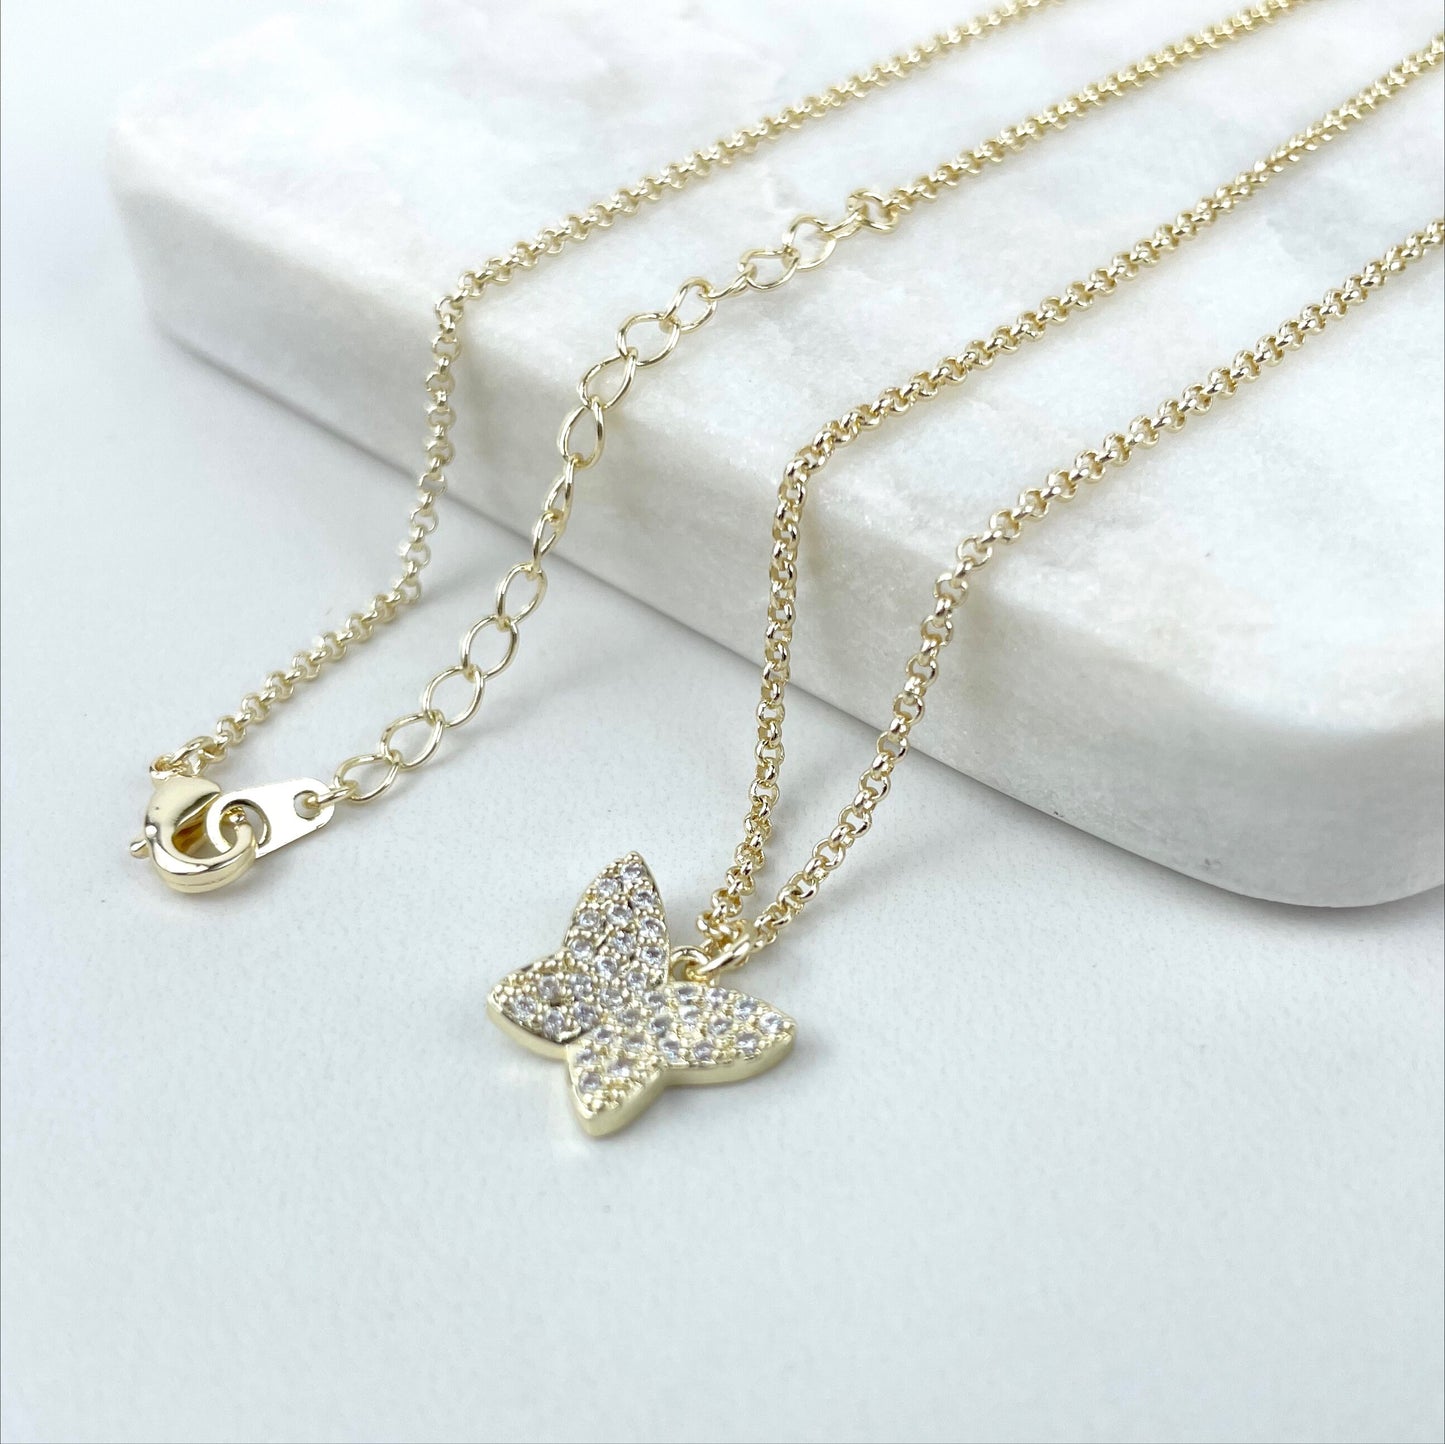 18k Gold Filled 1.6mm Cable Chain Necklace with Cubic Zirconia Petite Butterfly Shape Pendant & Stud Earrings Set Wholesale Jewelry Supplies